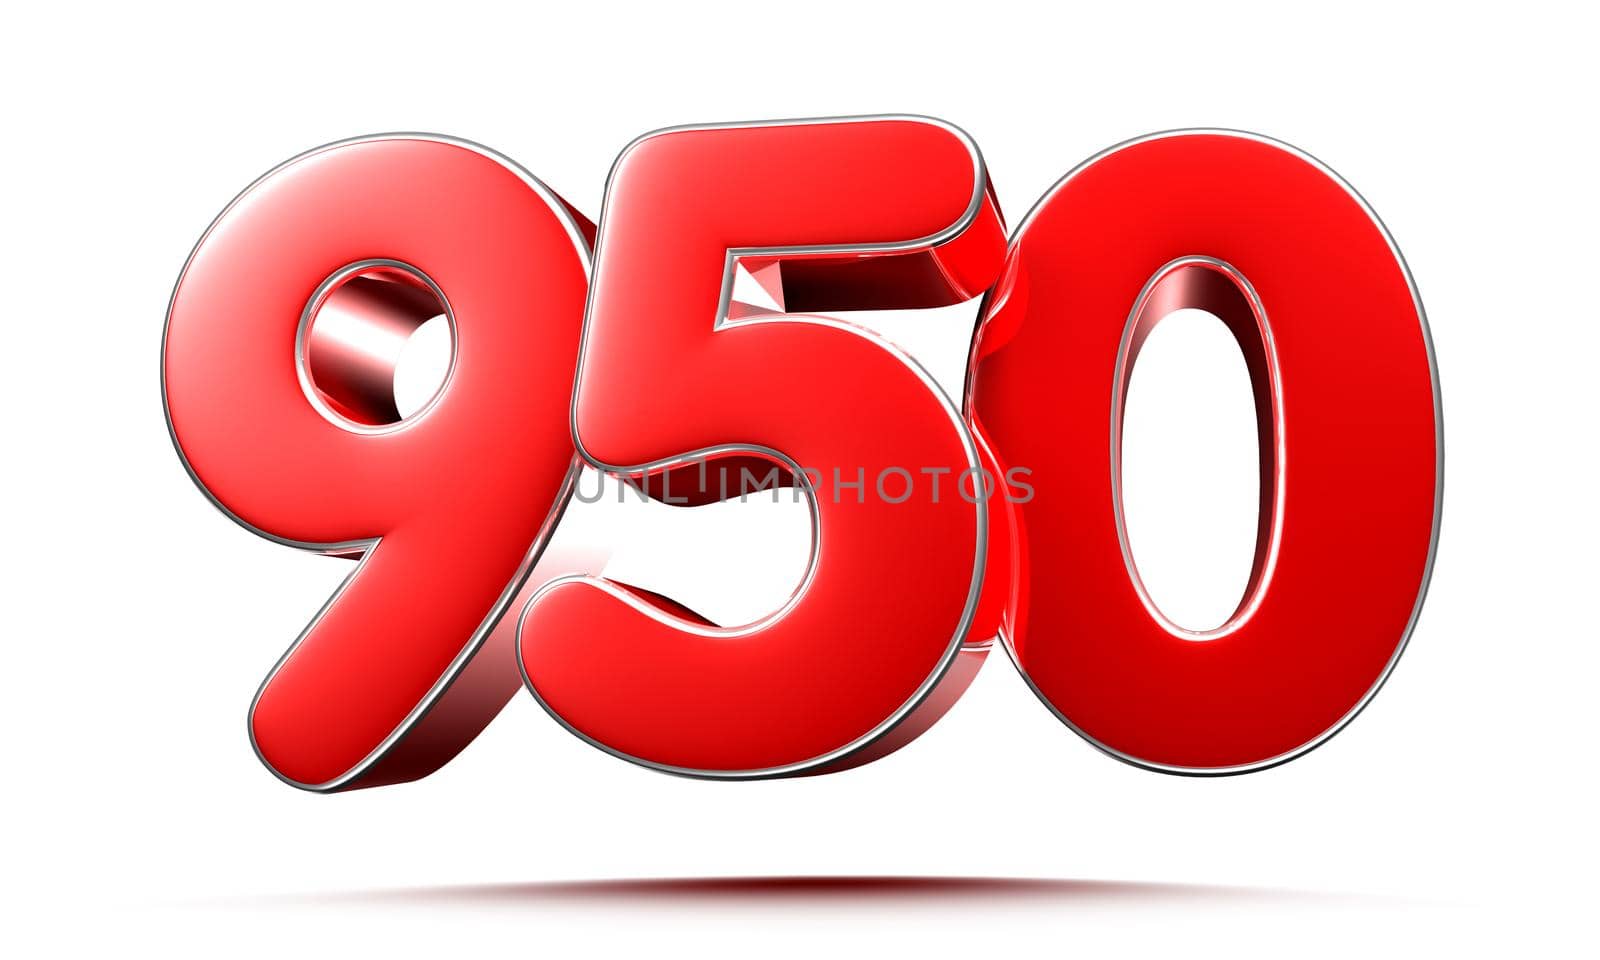 Rounded red numbers 950 on white background 3D illustration with clipping path